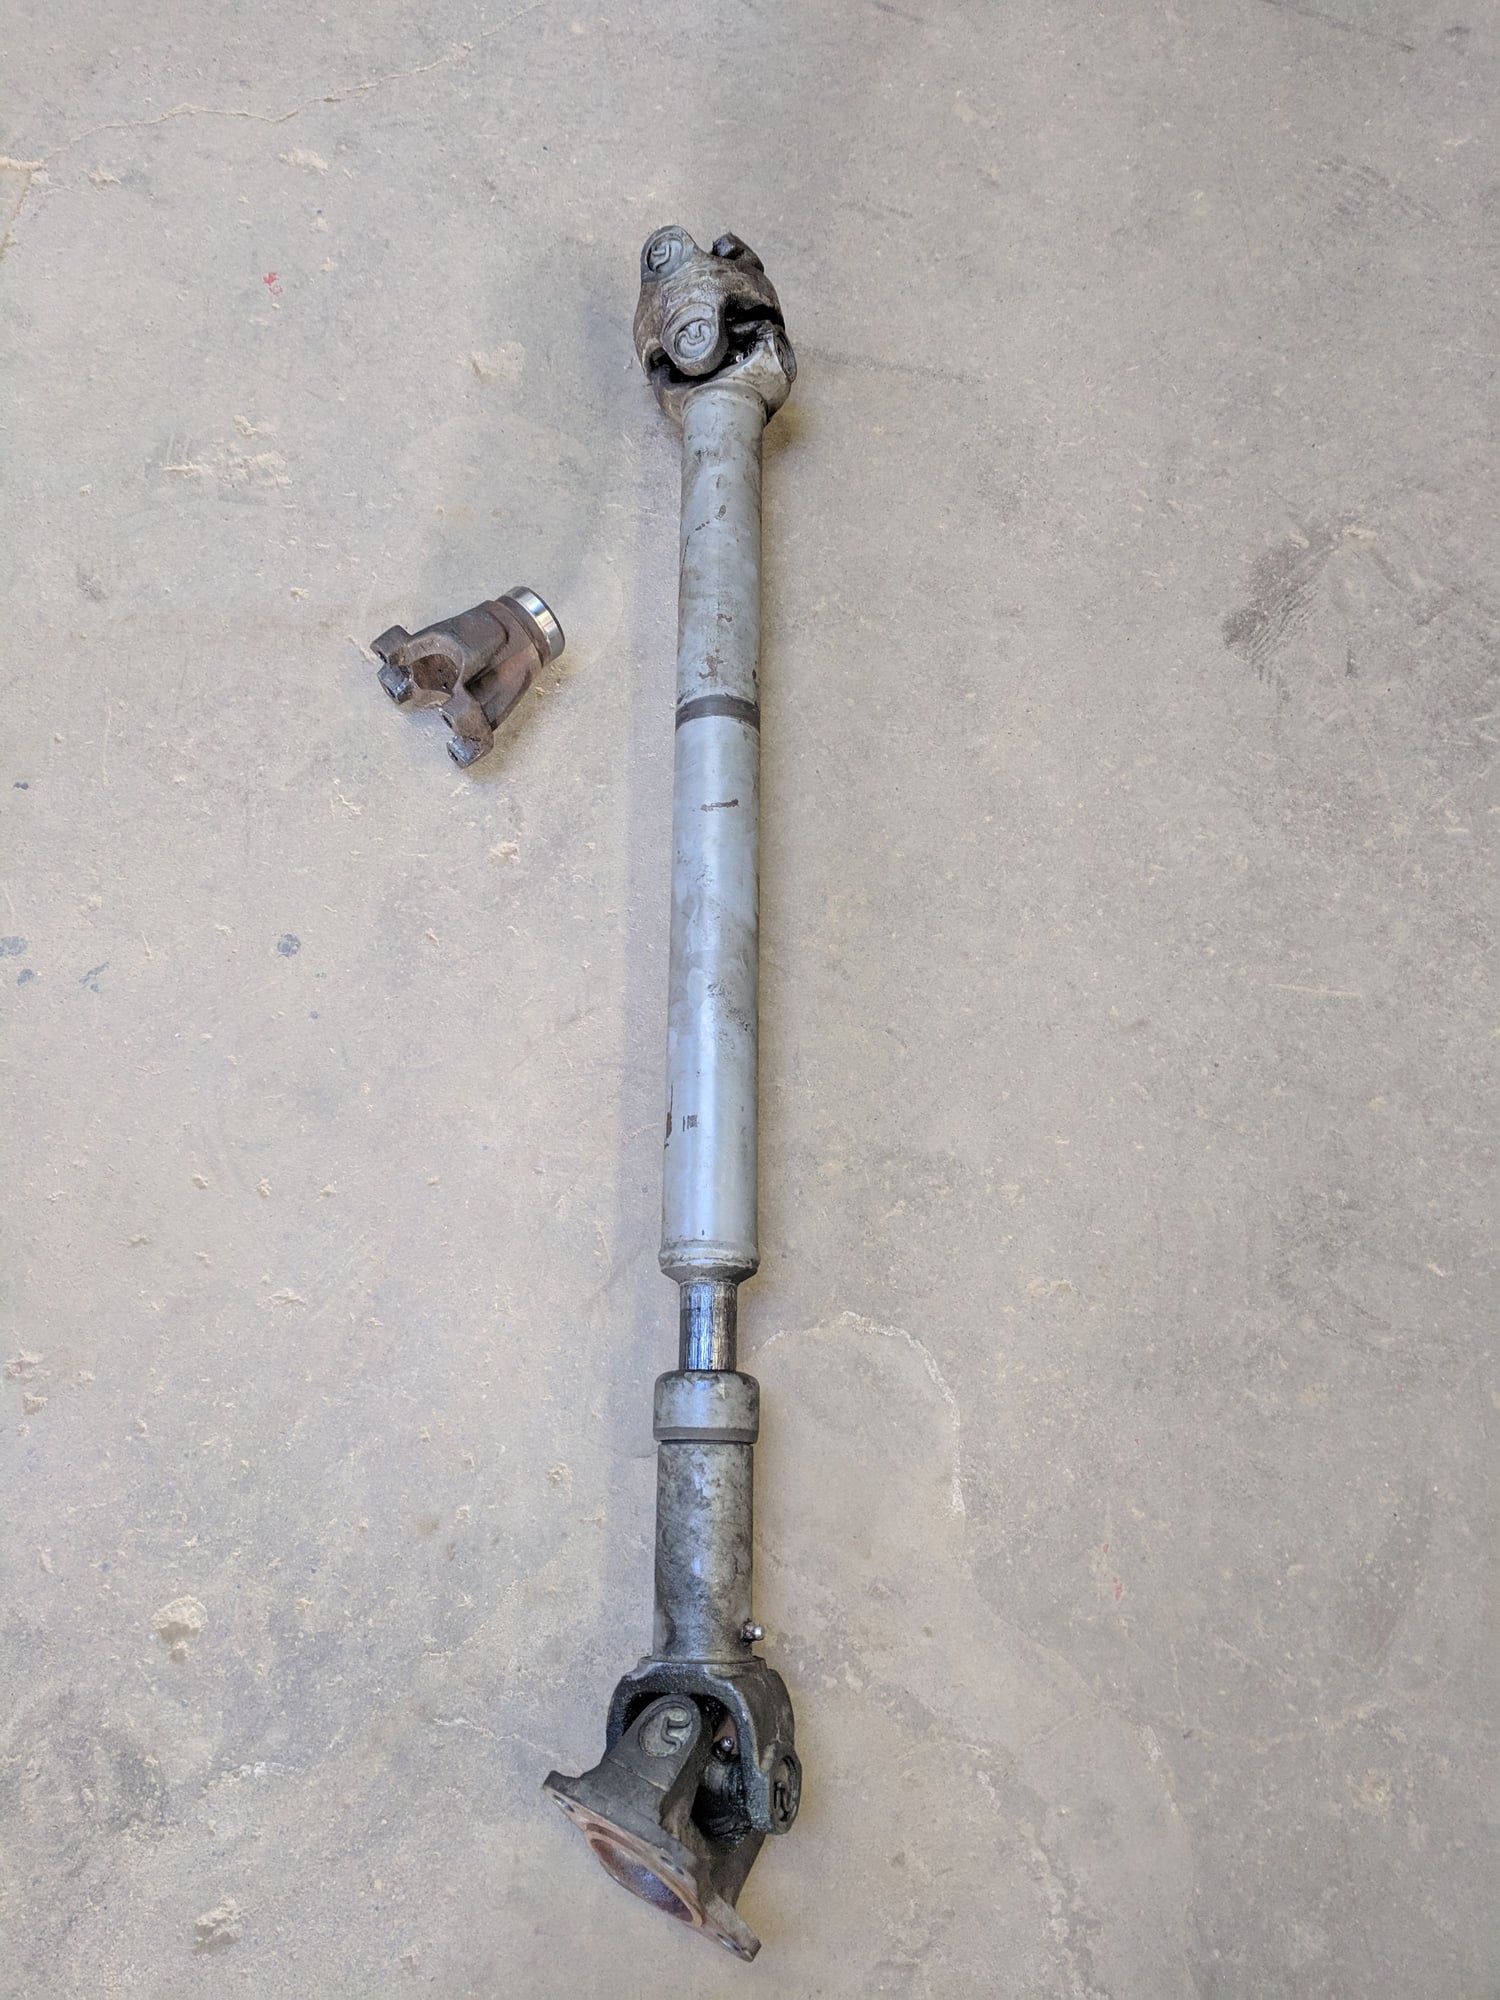 Drivetrain - Rubicon Express Front CV Driveshaft - Used - 2007 to 2017 Jeep Wrangler - Elgin, IL 60120, United States